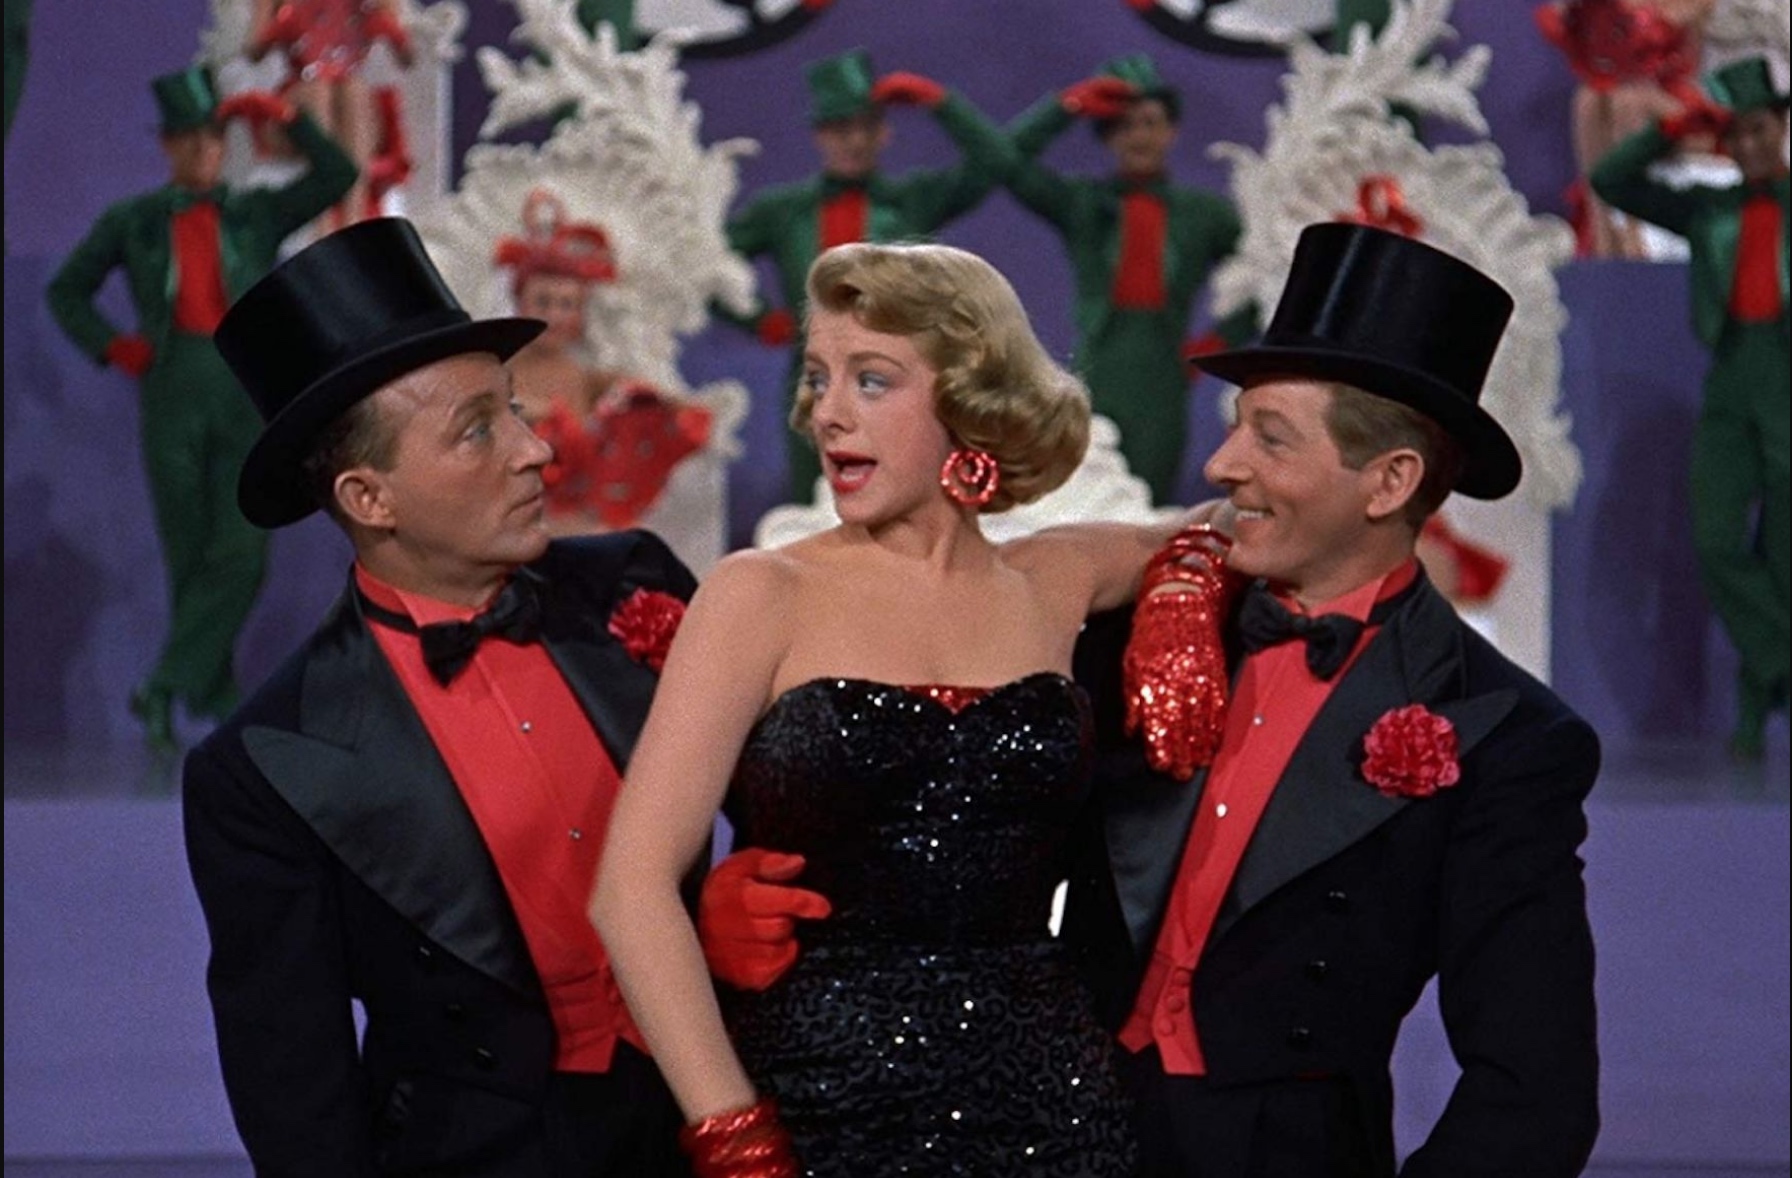 Bing Crosby, Rosemary Clooney, and Danny Kaye in "White Christmas" (1954) courtesy Paramount